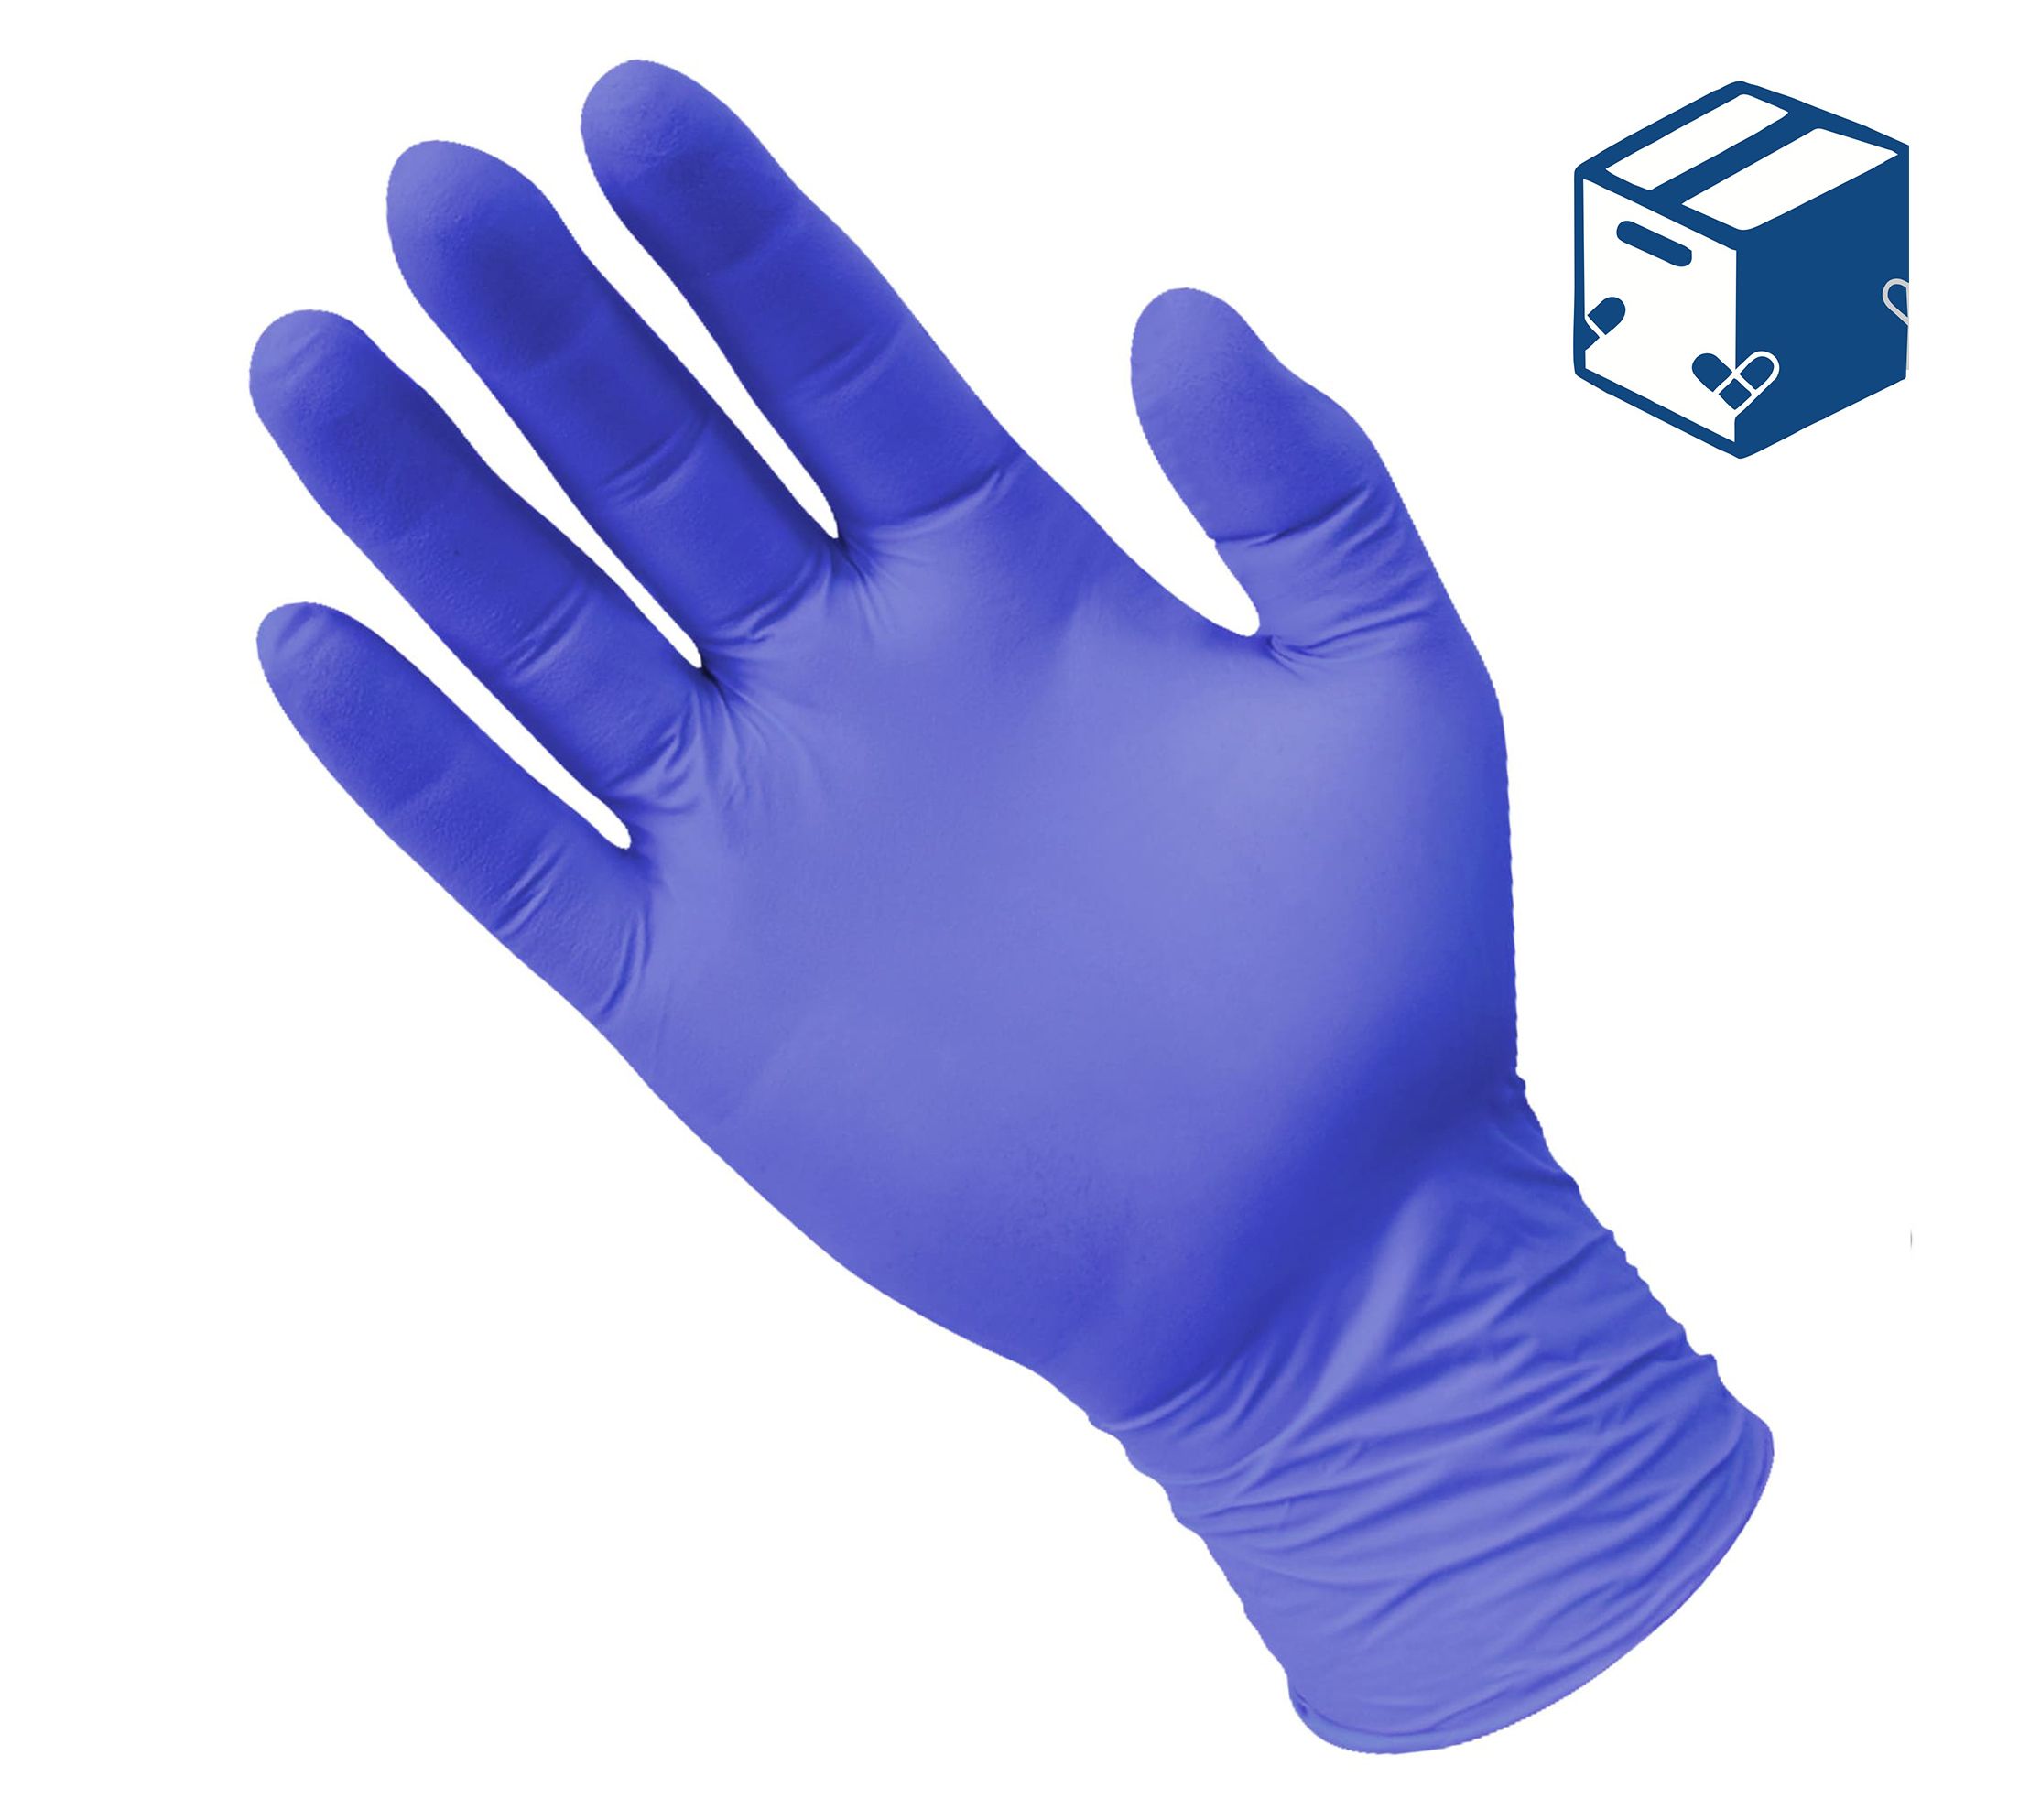 Black,Empty,Nitrile,Protective,Glove,Isolated,On,White